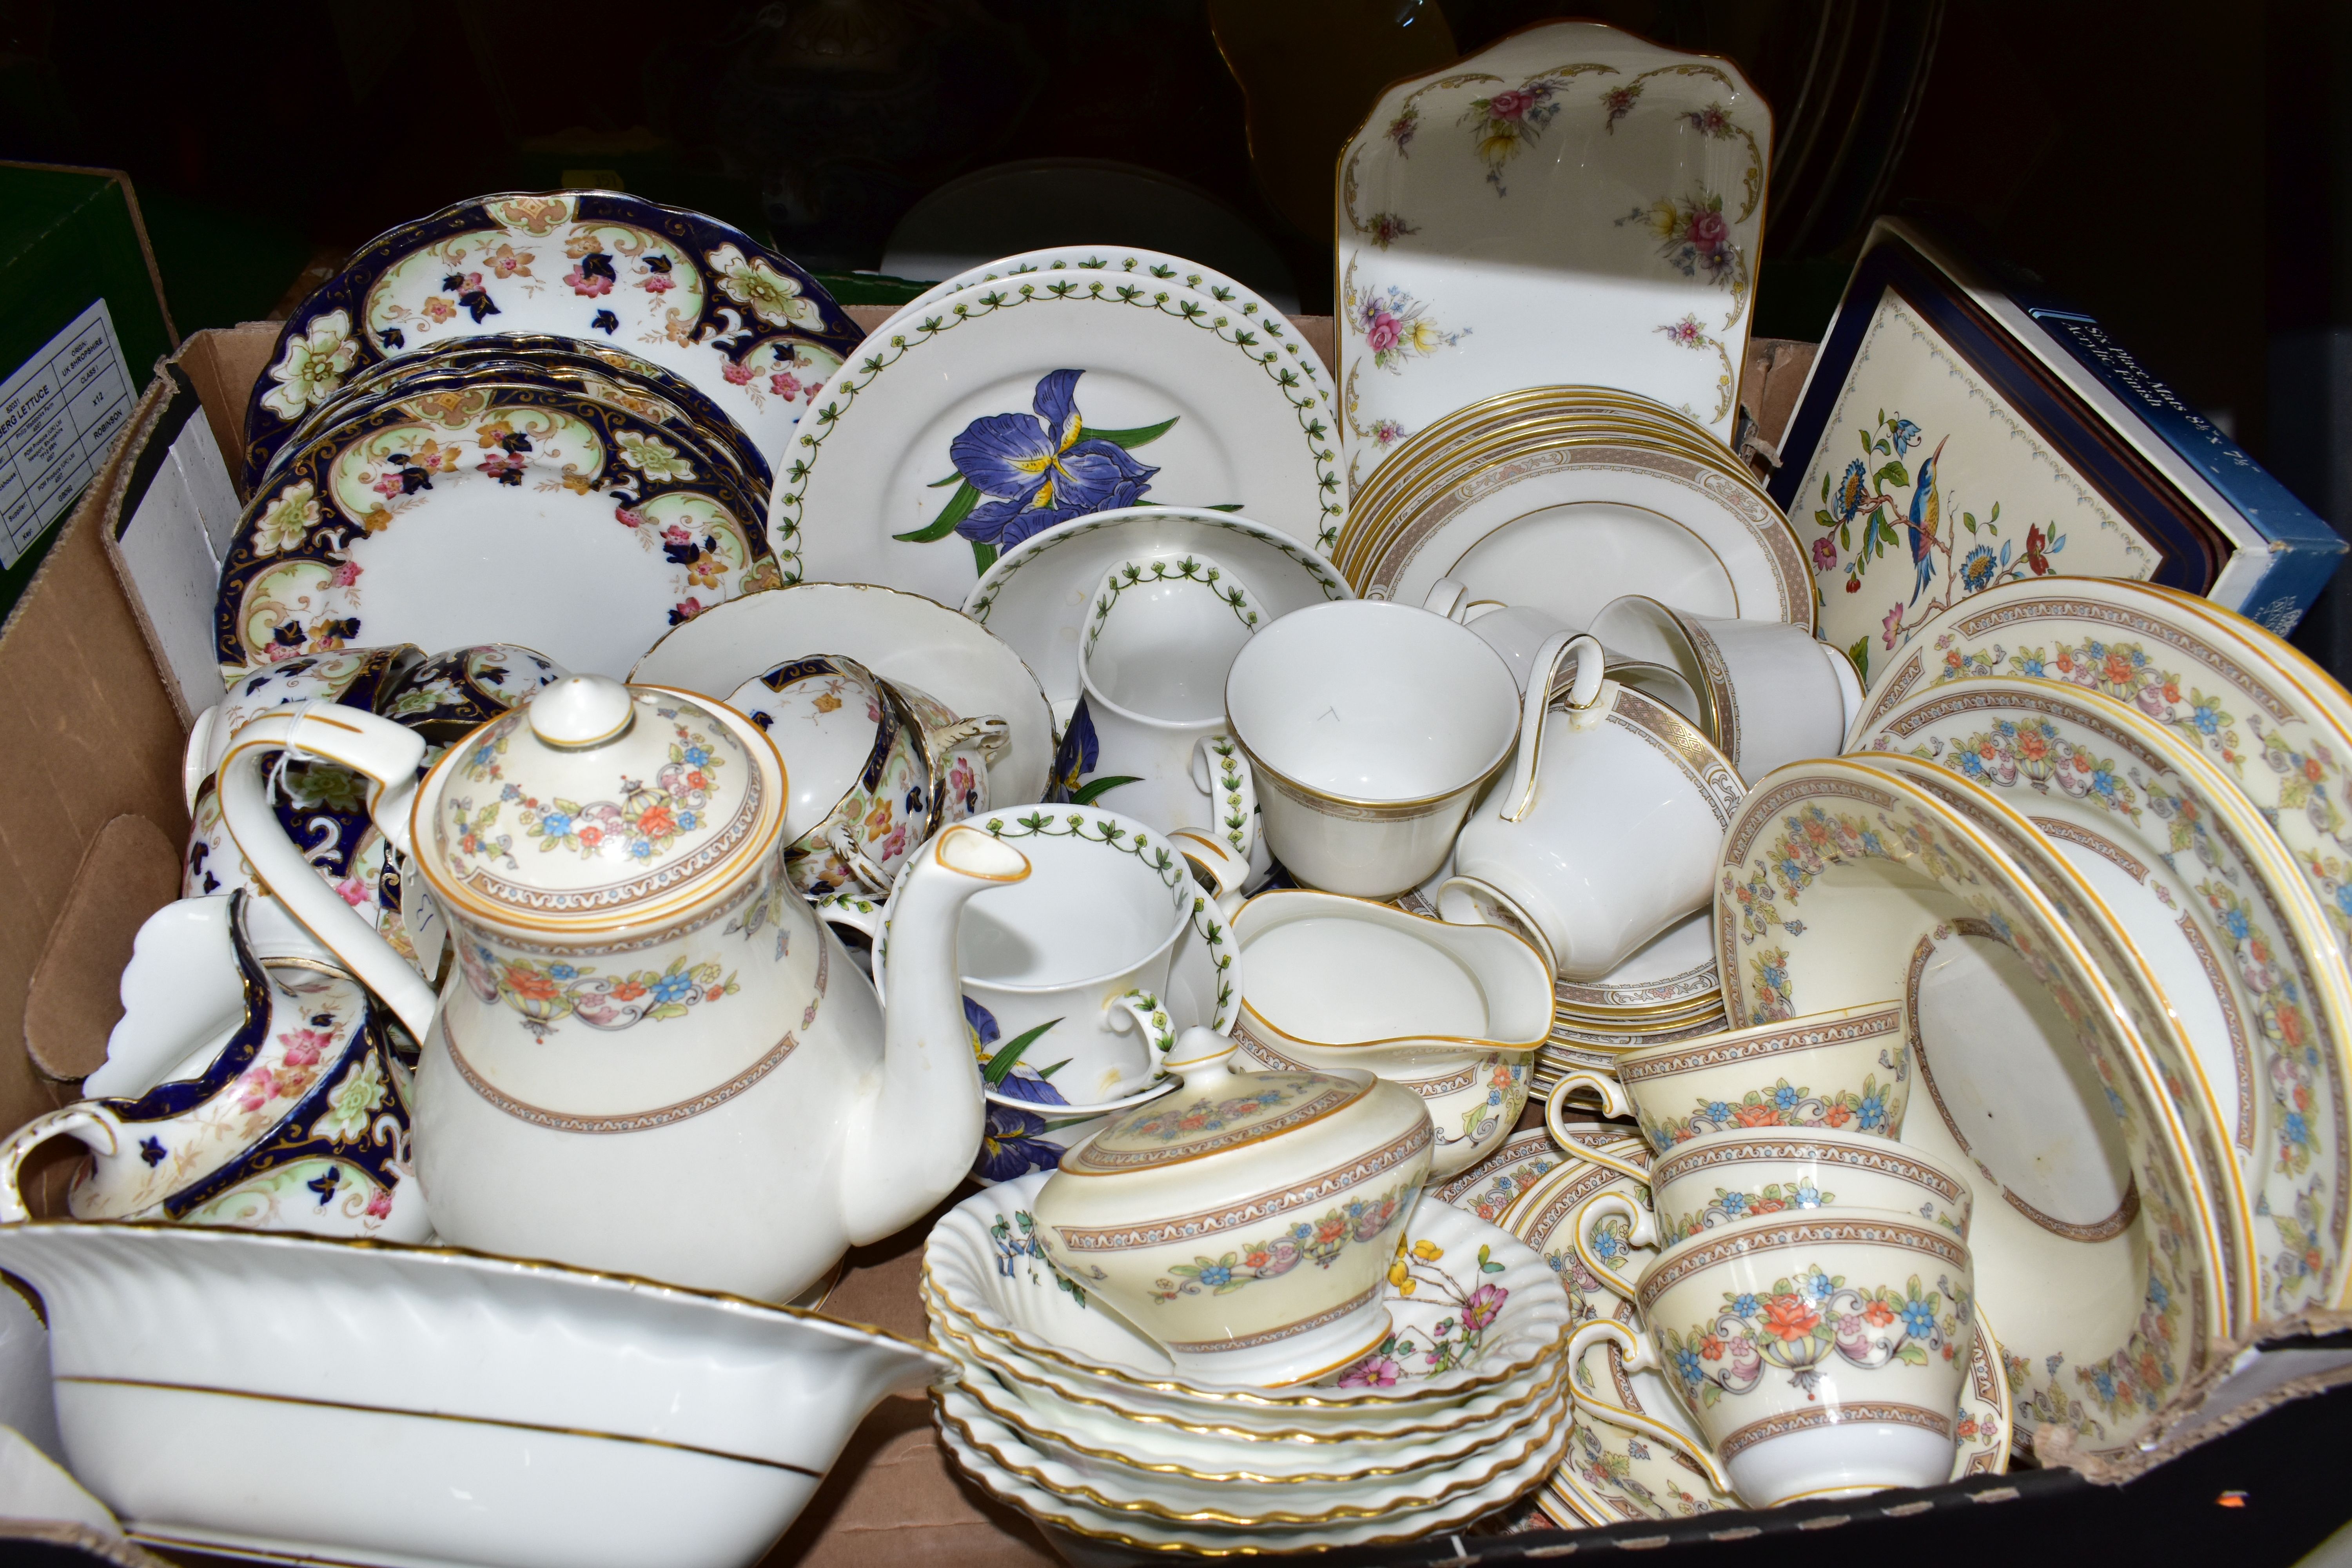 TWO BOXES OF AYNSLEY 'DEVONSHIRE' PATTERN DINNER WARES, BLUE & WHITE DINNER WARES, ASSORTED TEA - Image 2 of 3